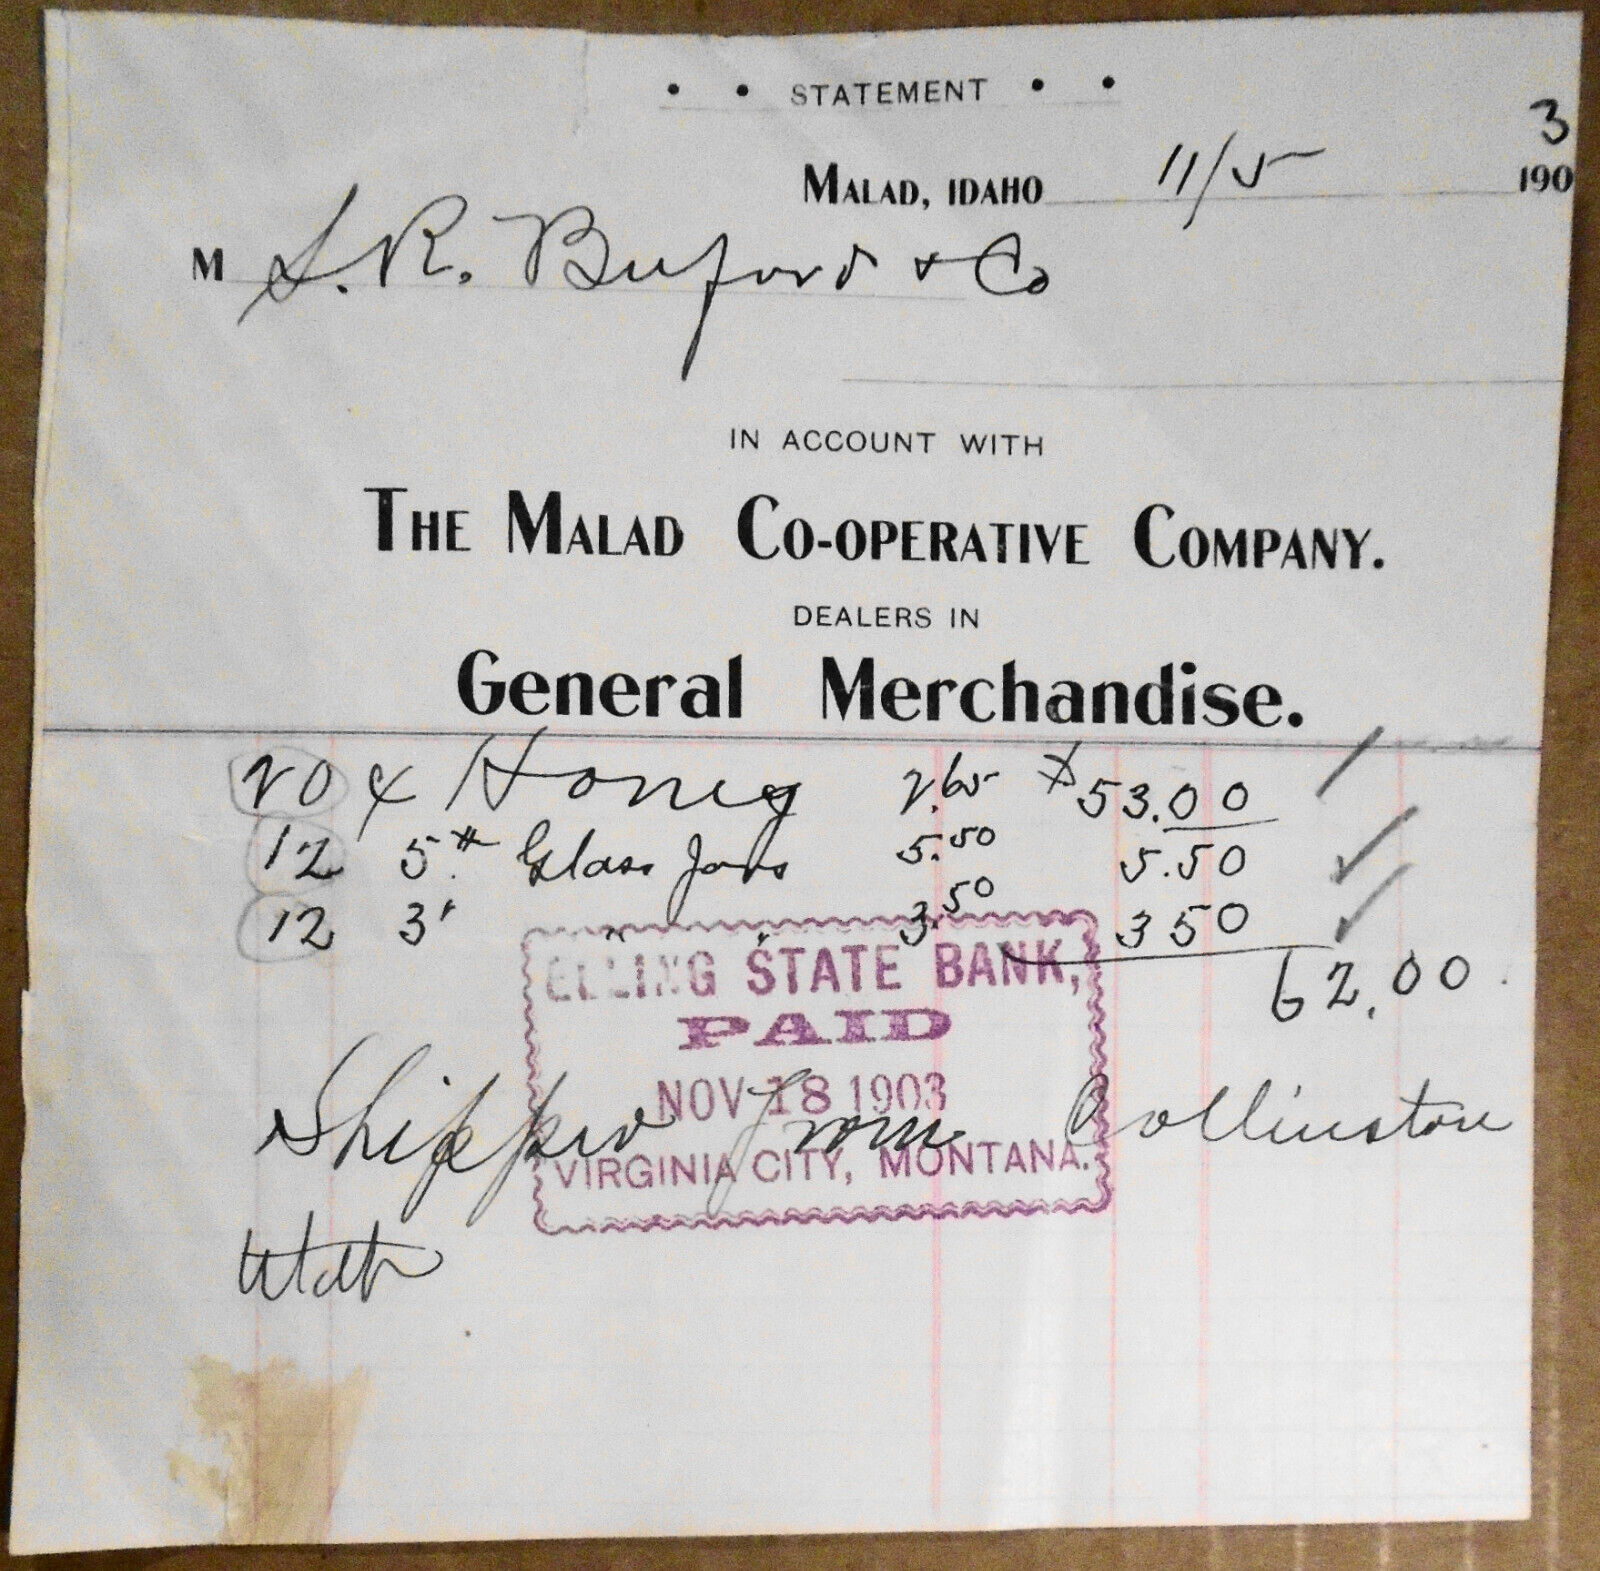 1903 Statement of S. R. Buford, in account with Malad Co-operative Co., Malad ID